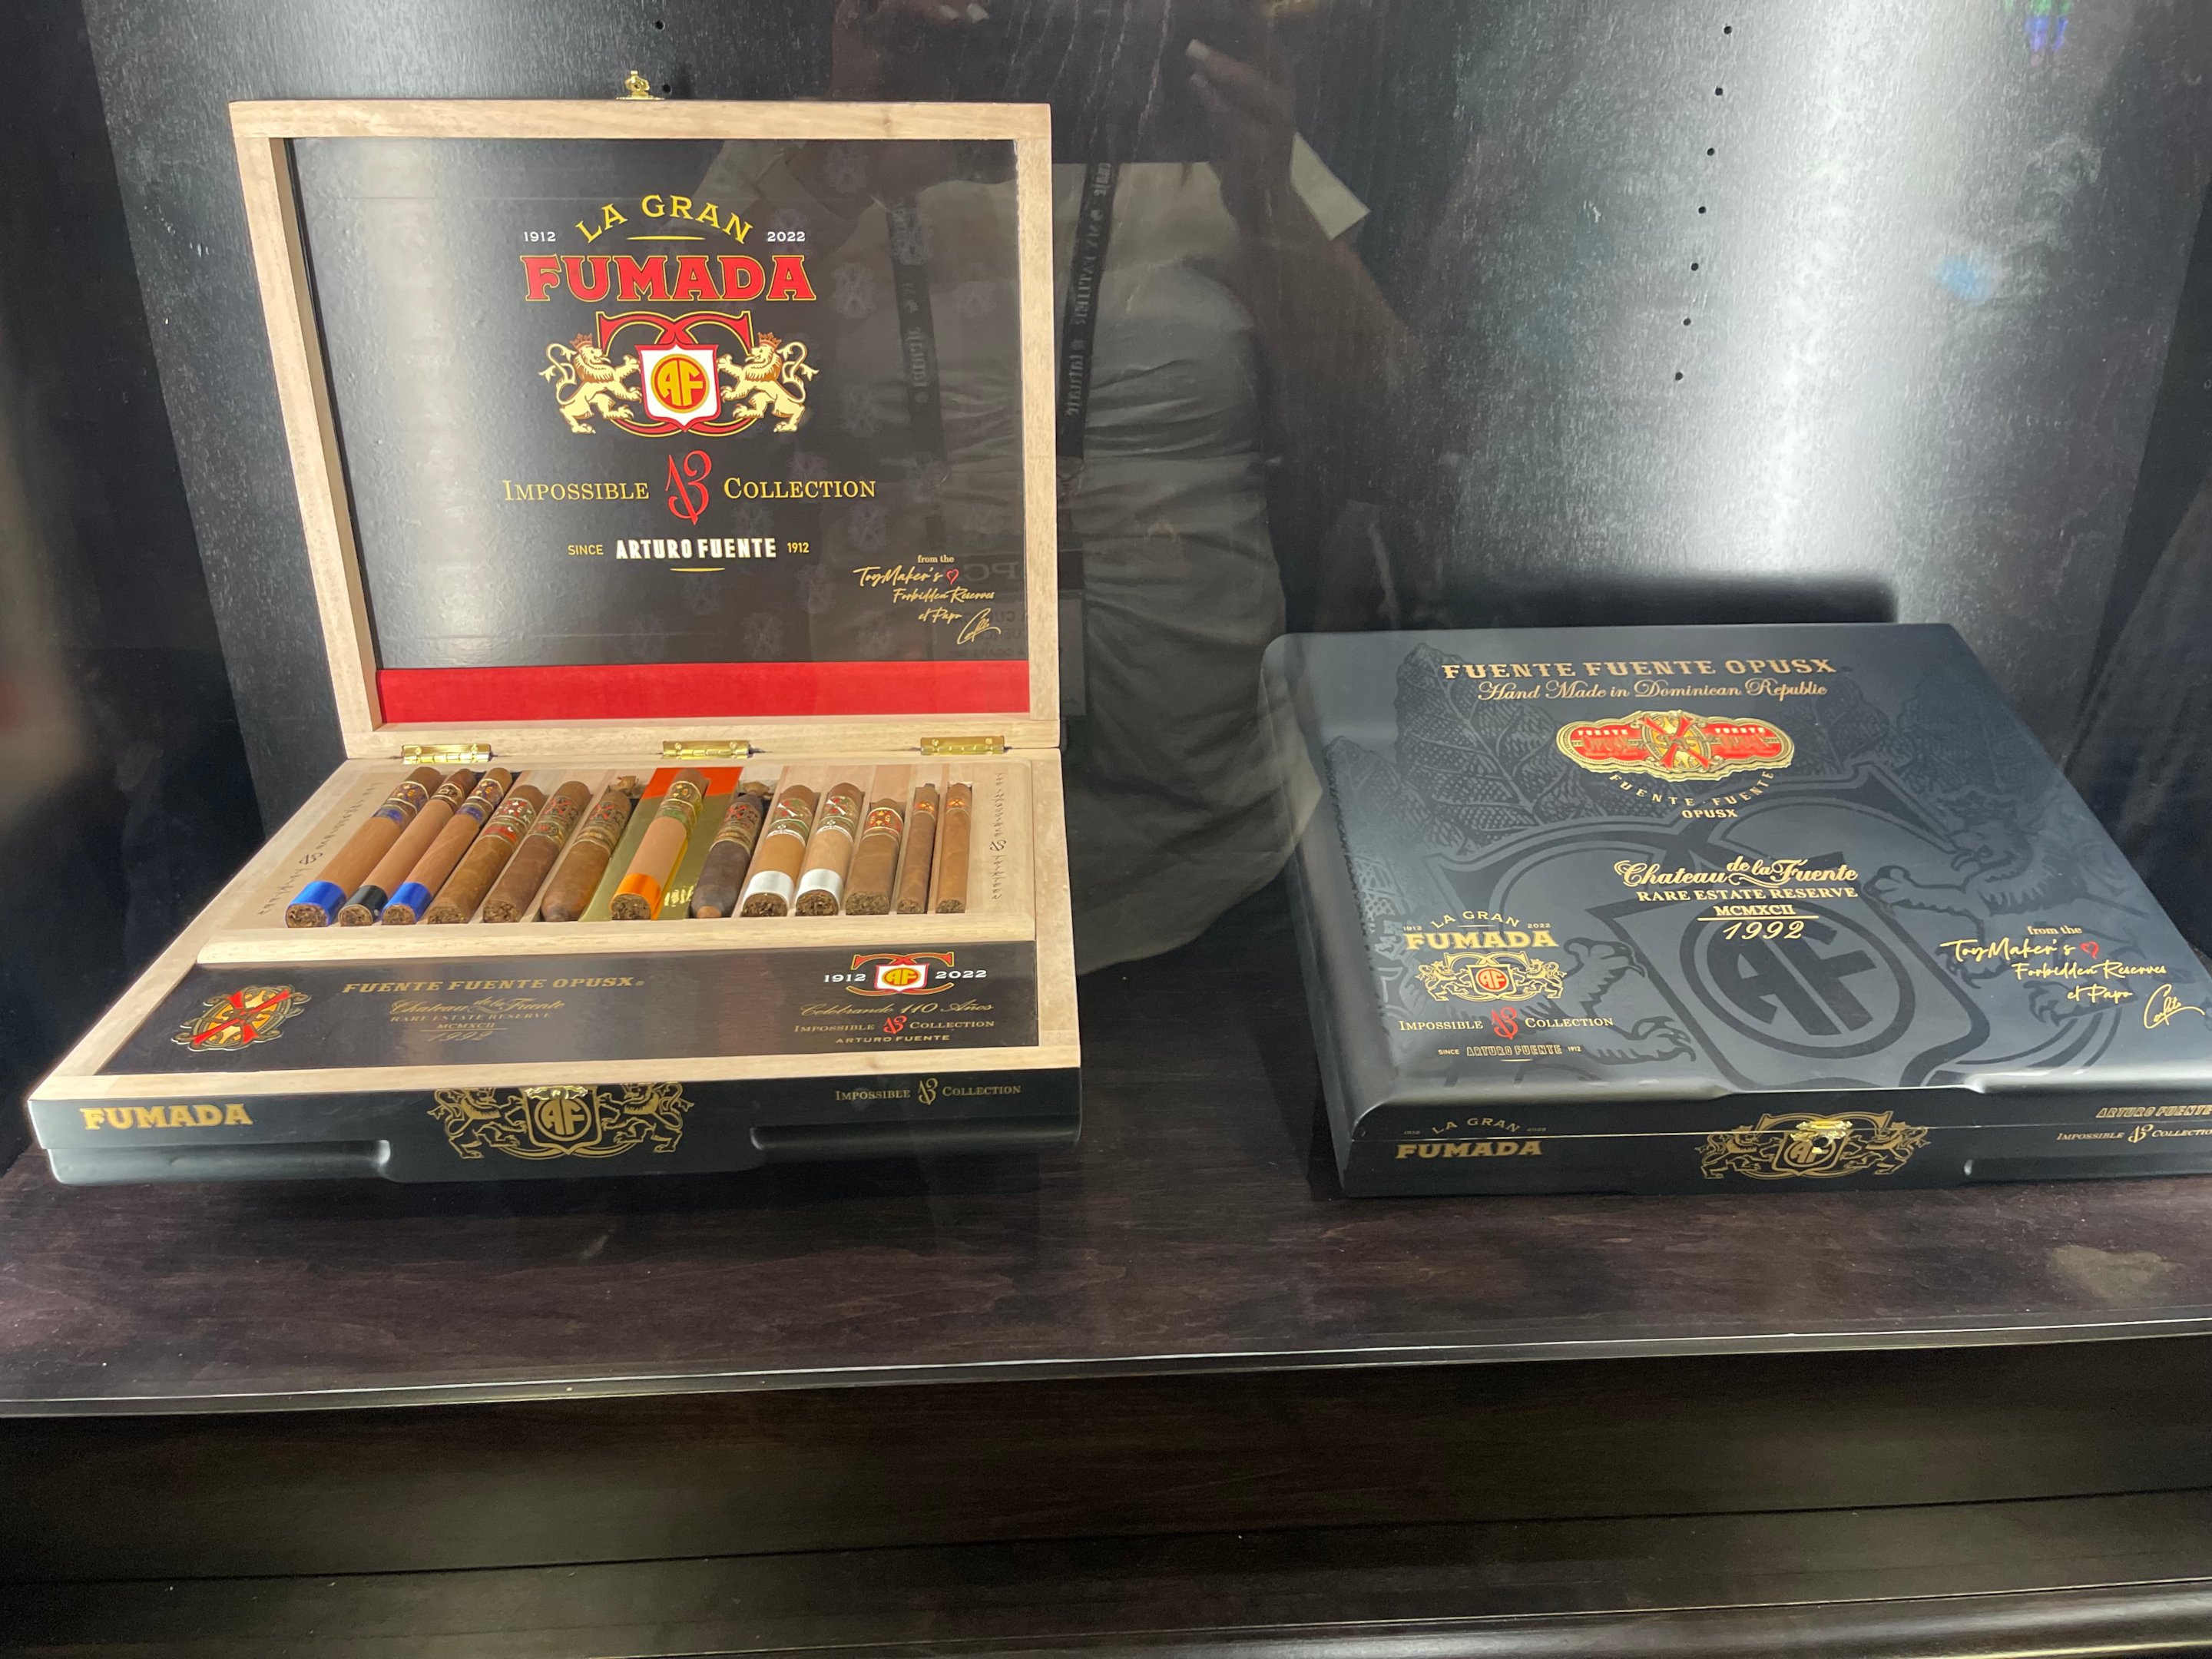 A picture of the Impossible Box with the Arturo Fuente logo